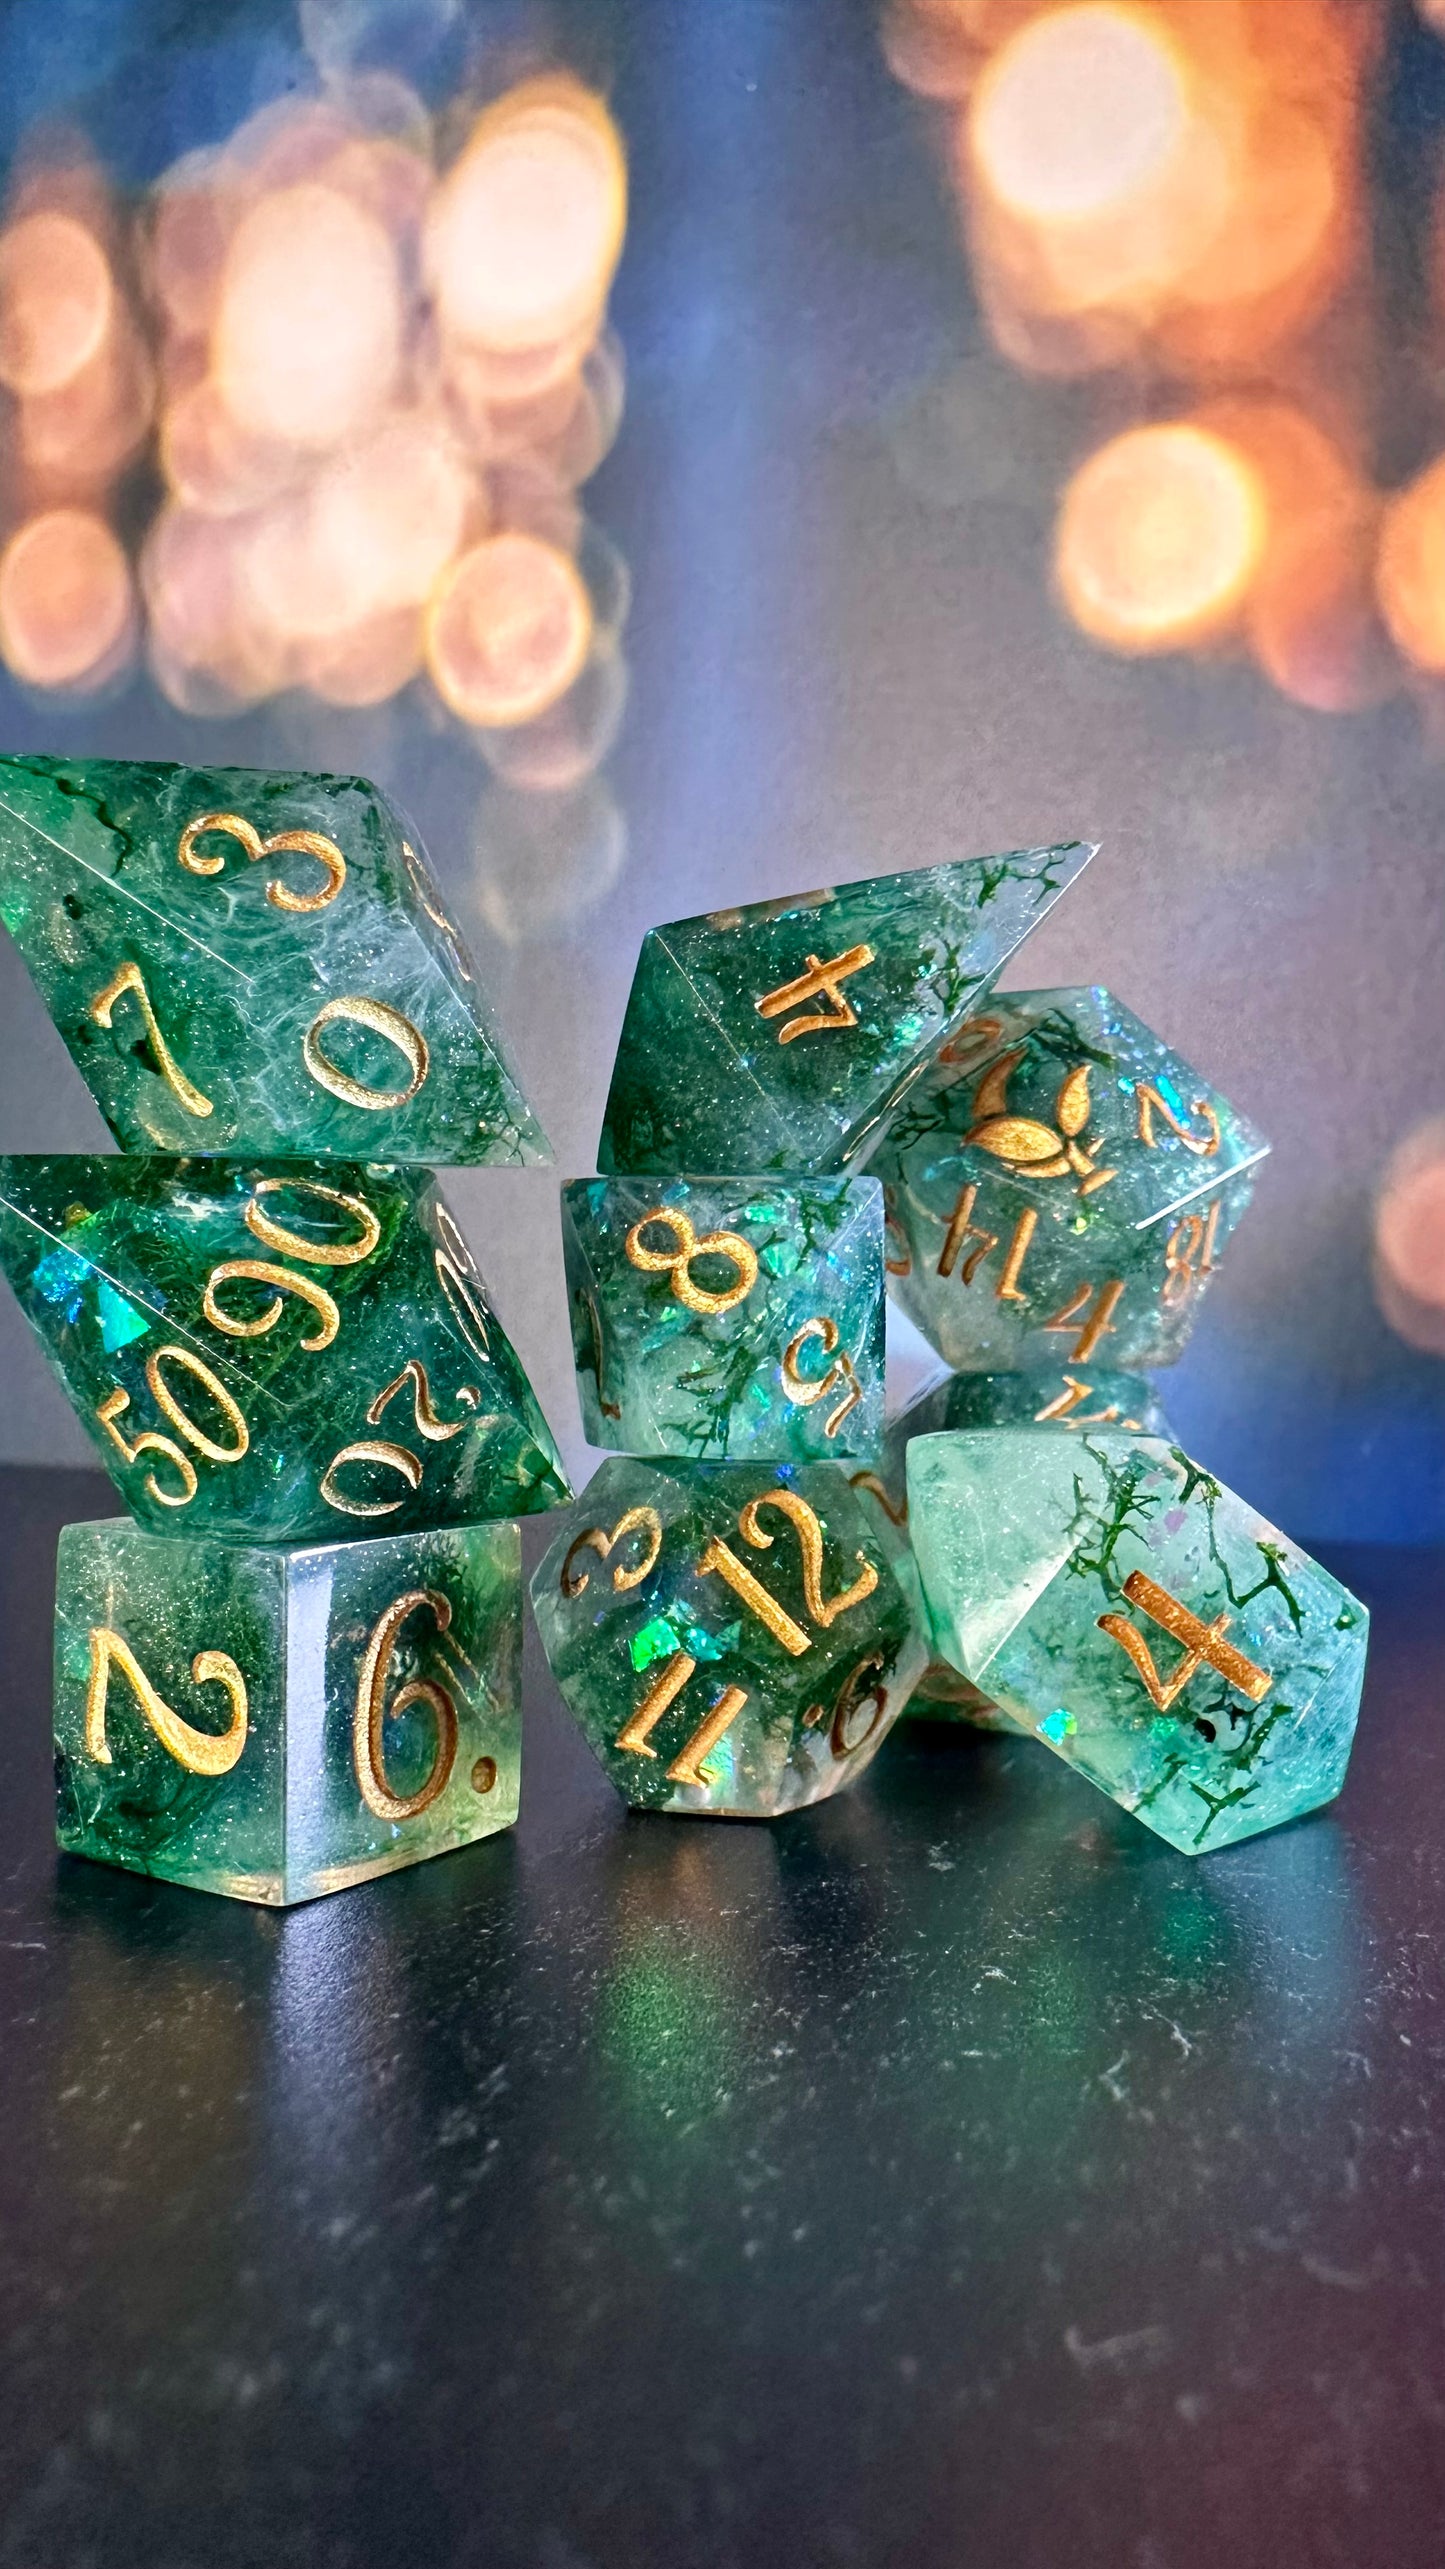 Ithan Holstrom-  8 piece polyhedral dice set